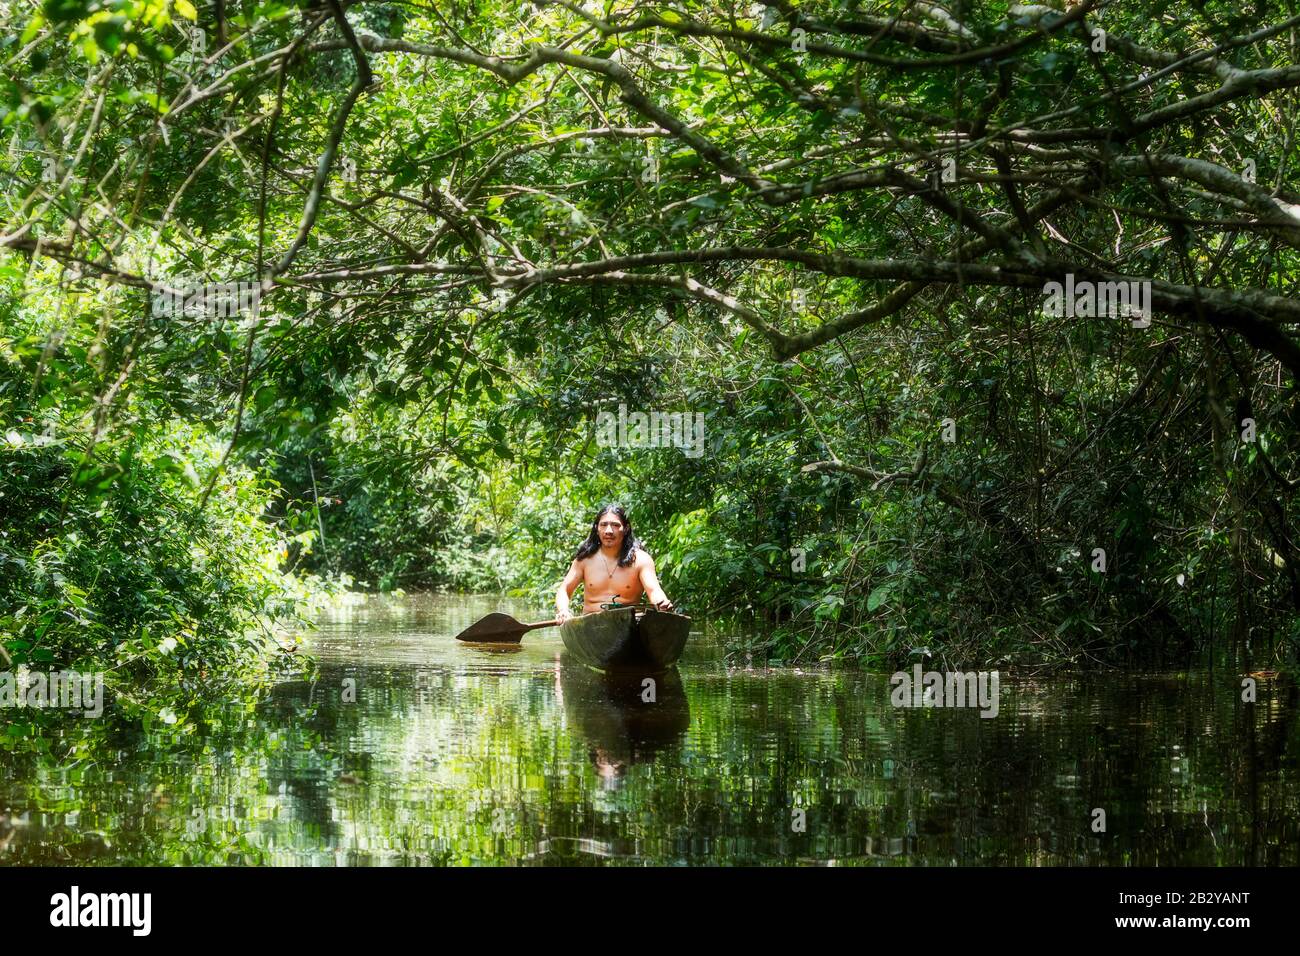 Aboriginal Mature Man On Typical Wooden Canoe Sliced From A Single Timber Navigating Gloomy Waters Of Ecuadorian Amazonian First Rain Forest Stock Photo